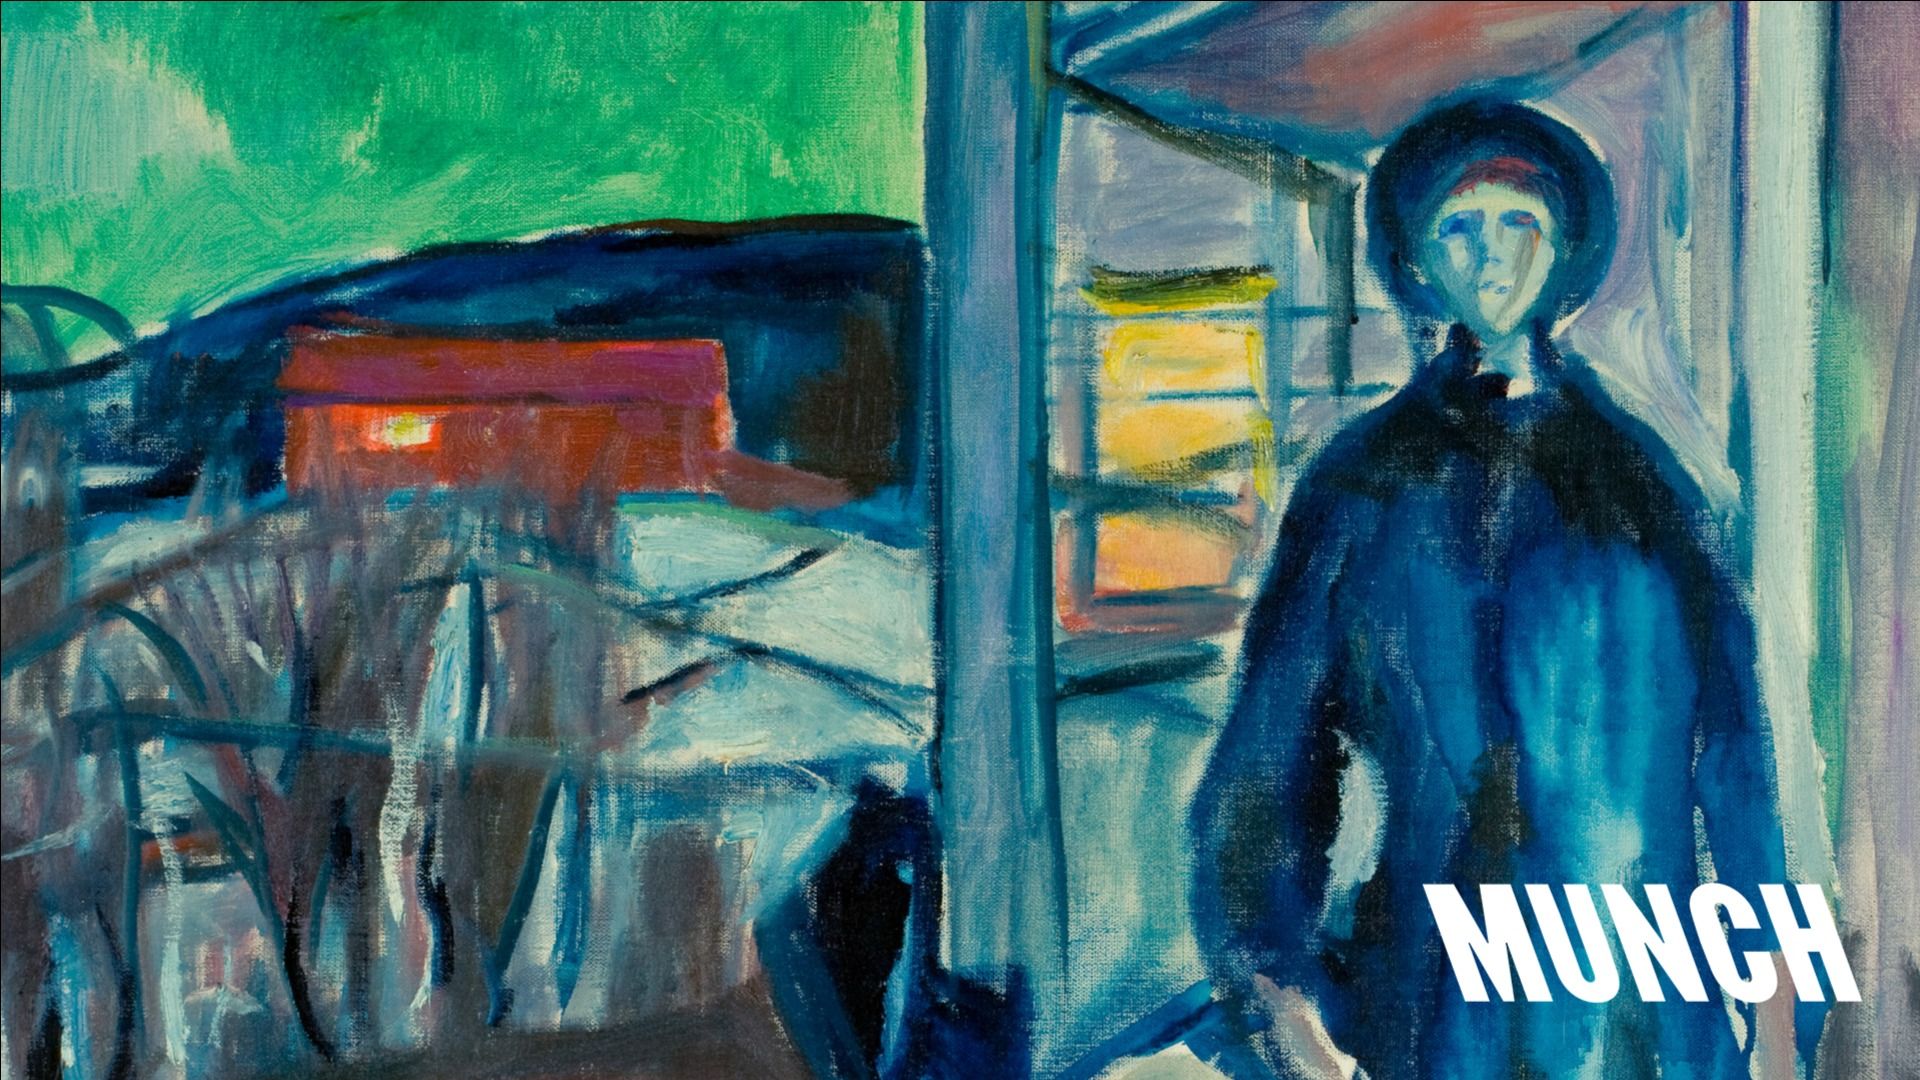 Live Tour: We Bring Edvard Munch to You